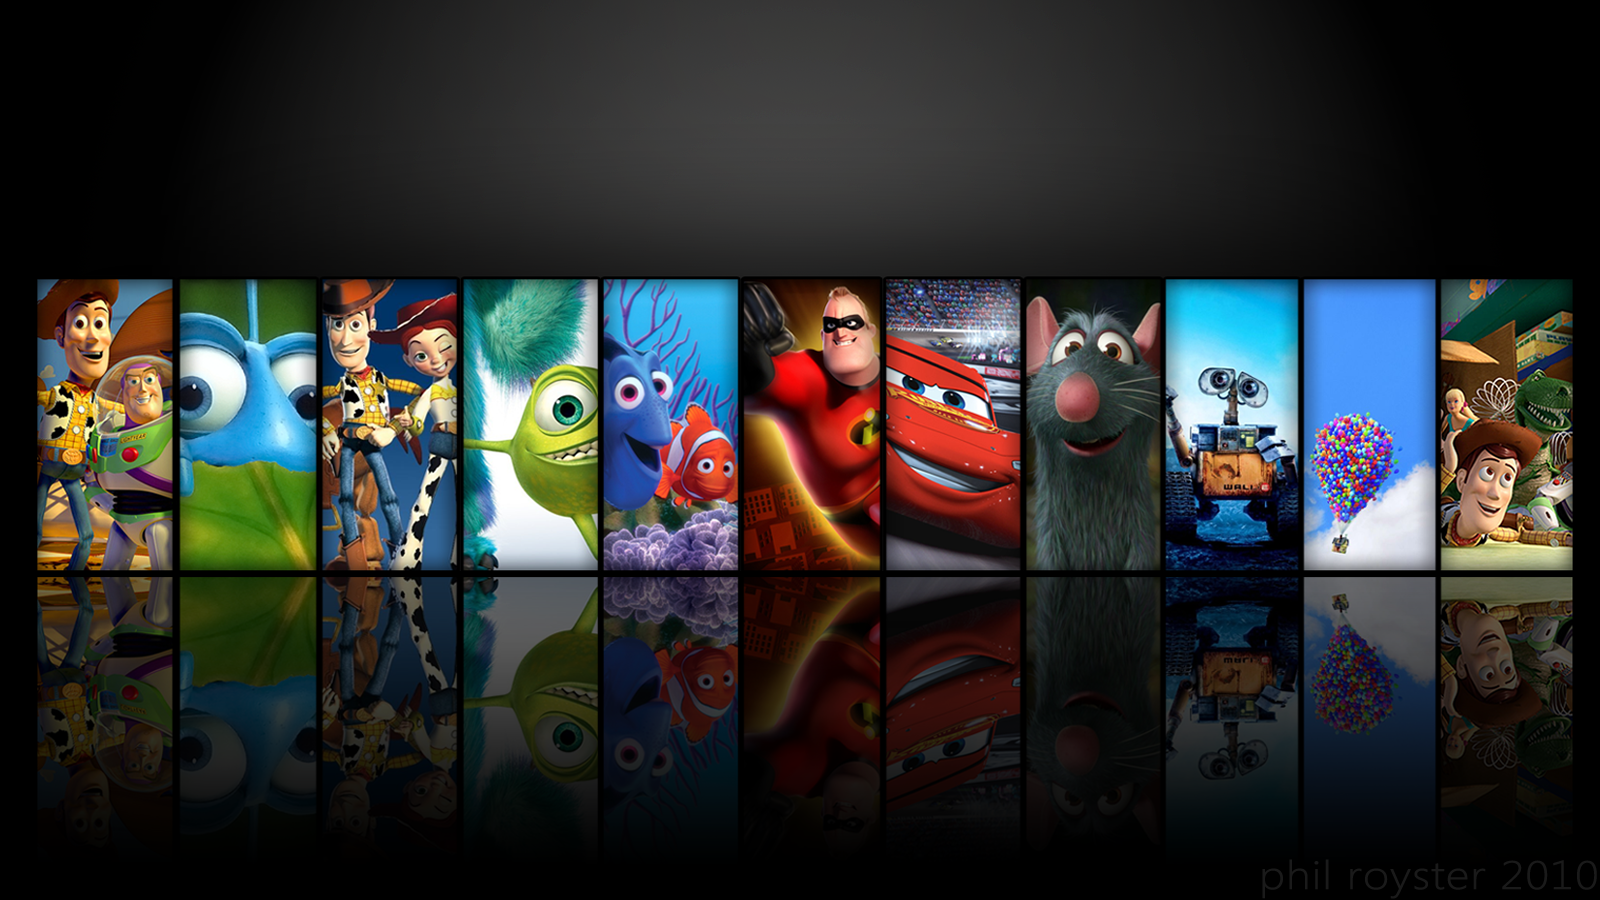 Pixar Animation Studios Toy Story Toy Story 2 Monsters Inc Ratatouille WALL E Up Movie Toy Story 3 C 1600x900